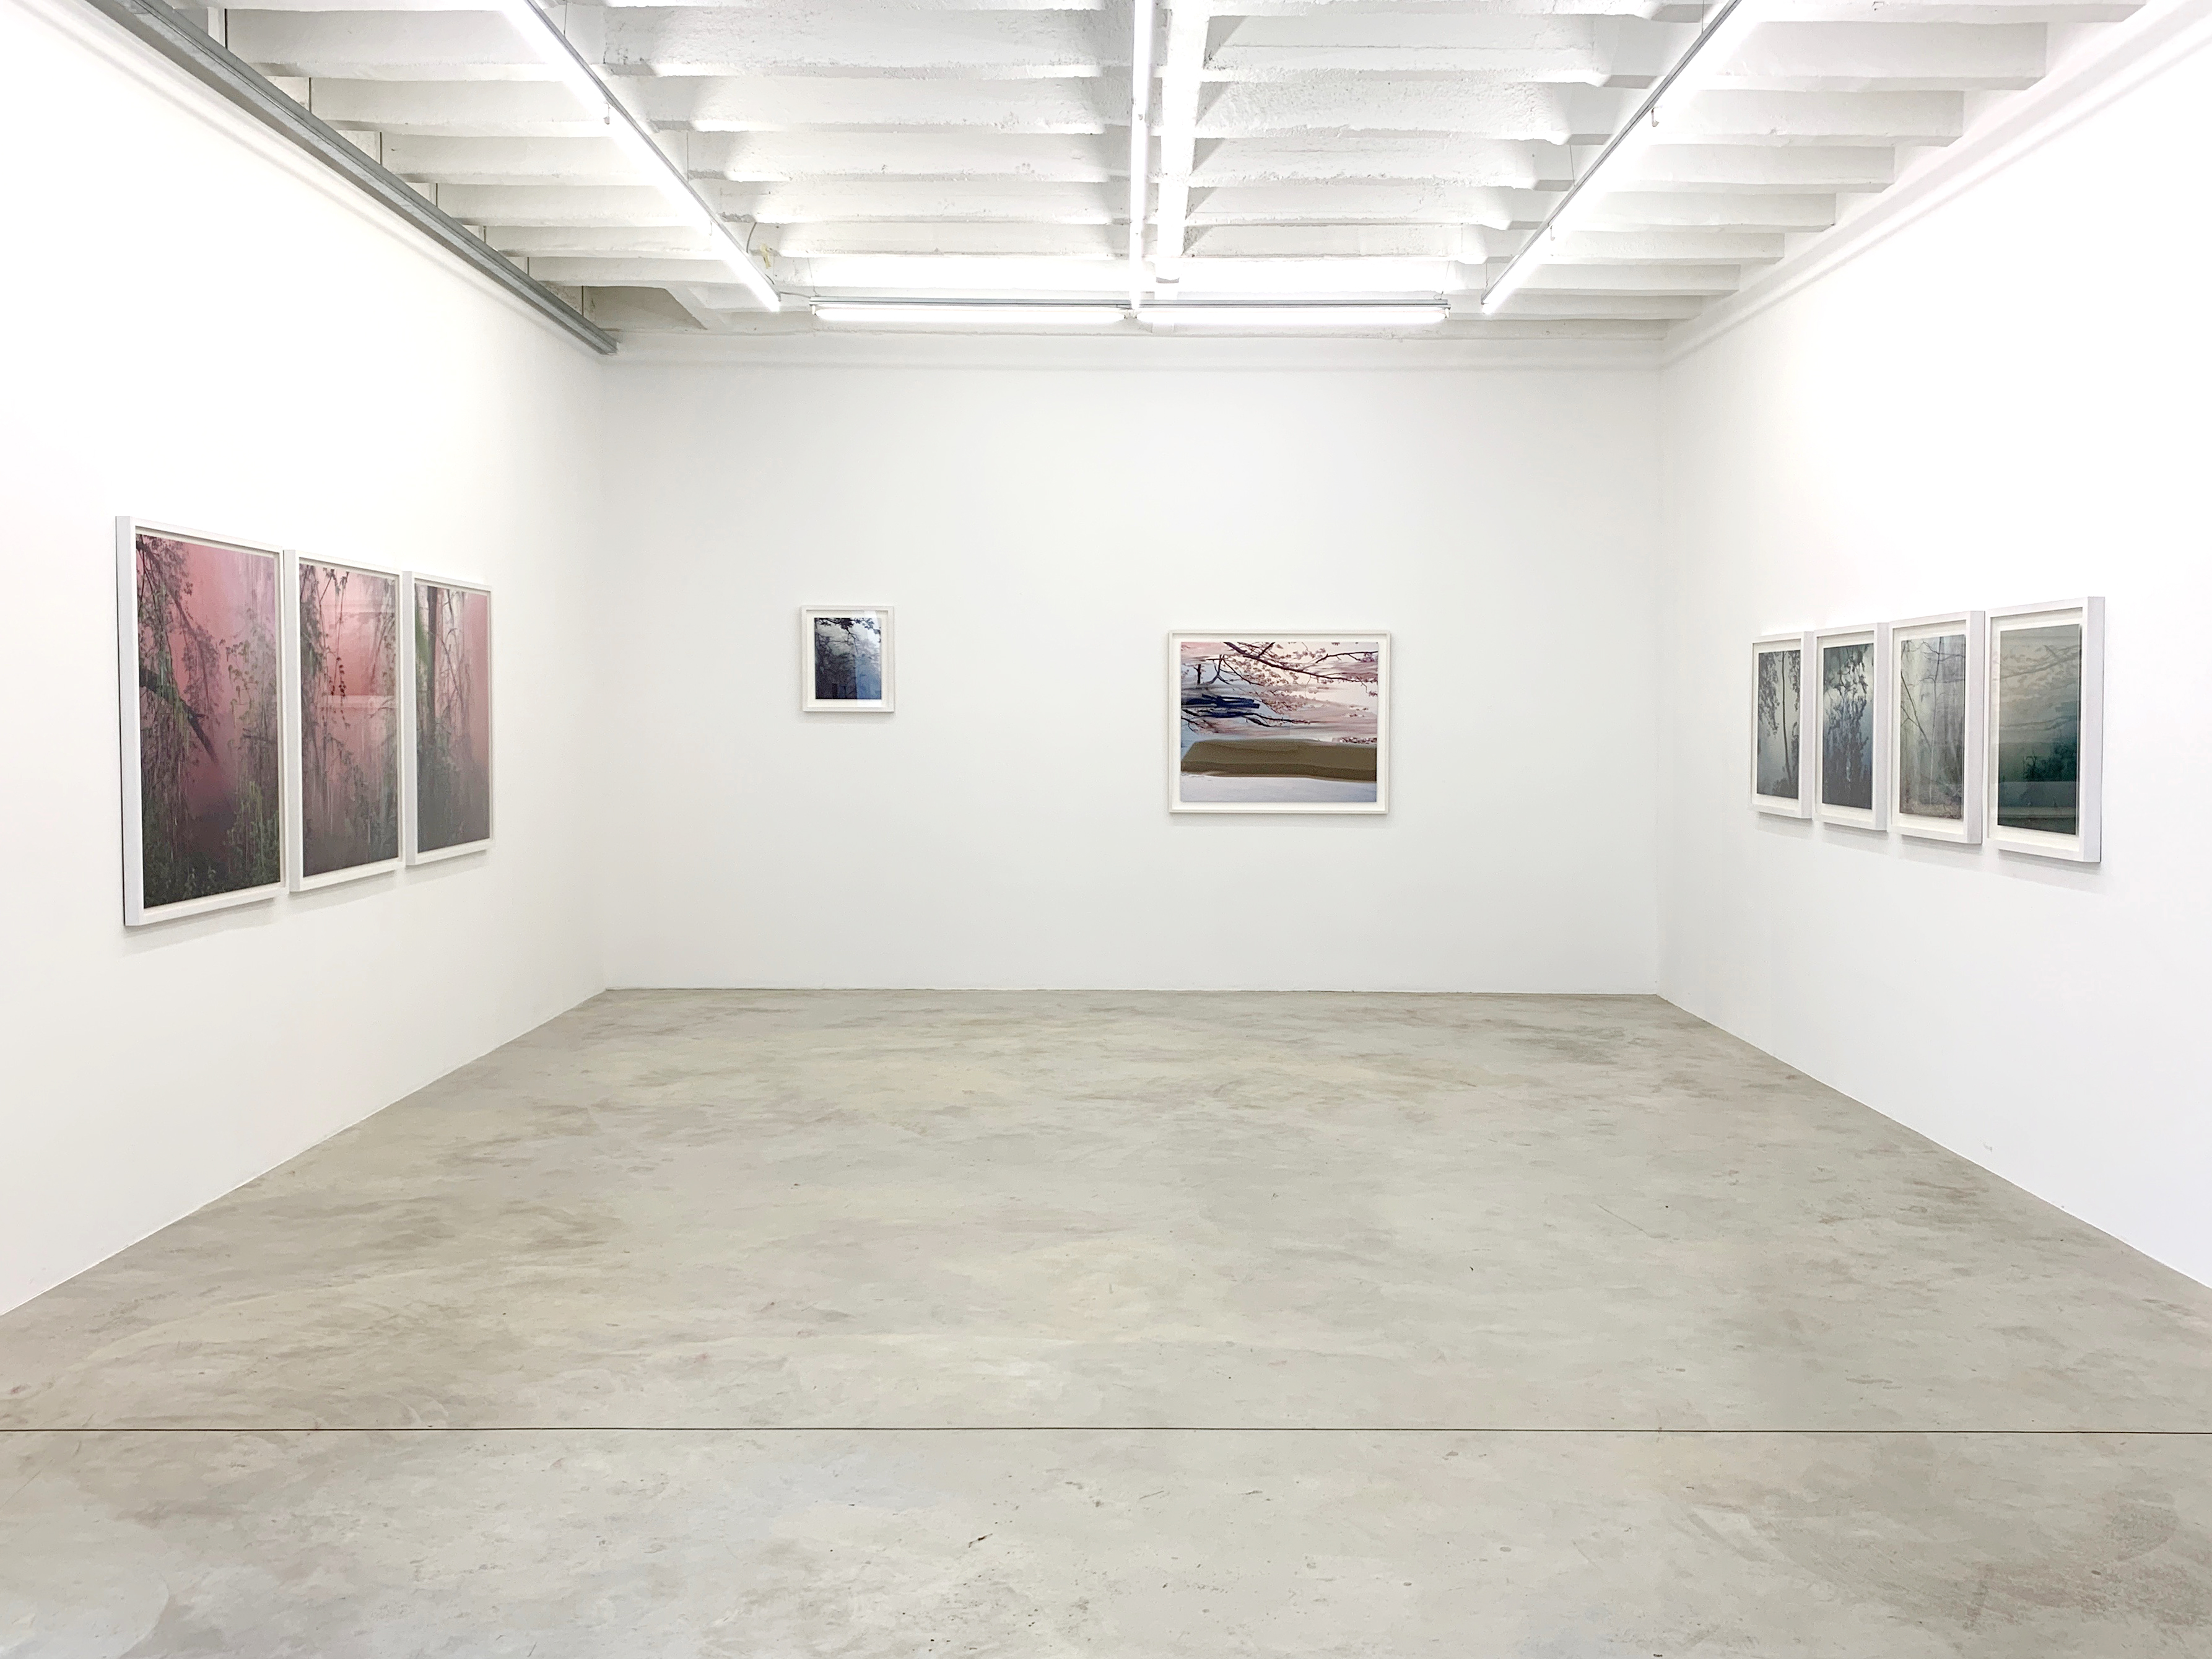 Exhibition View of 'Smokeworks' at Persons Projects